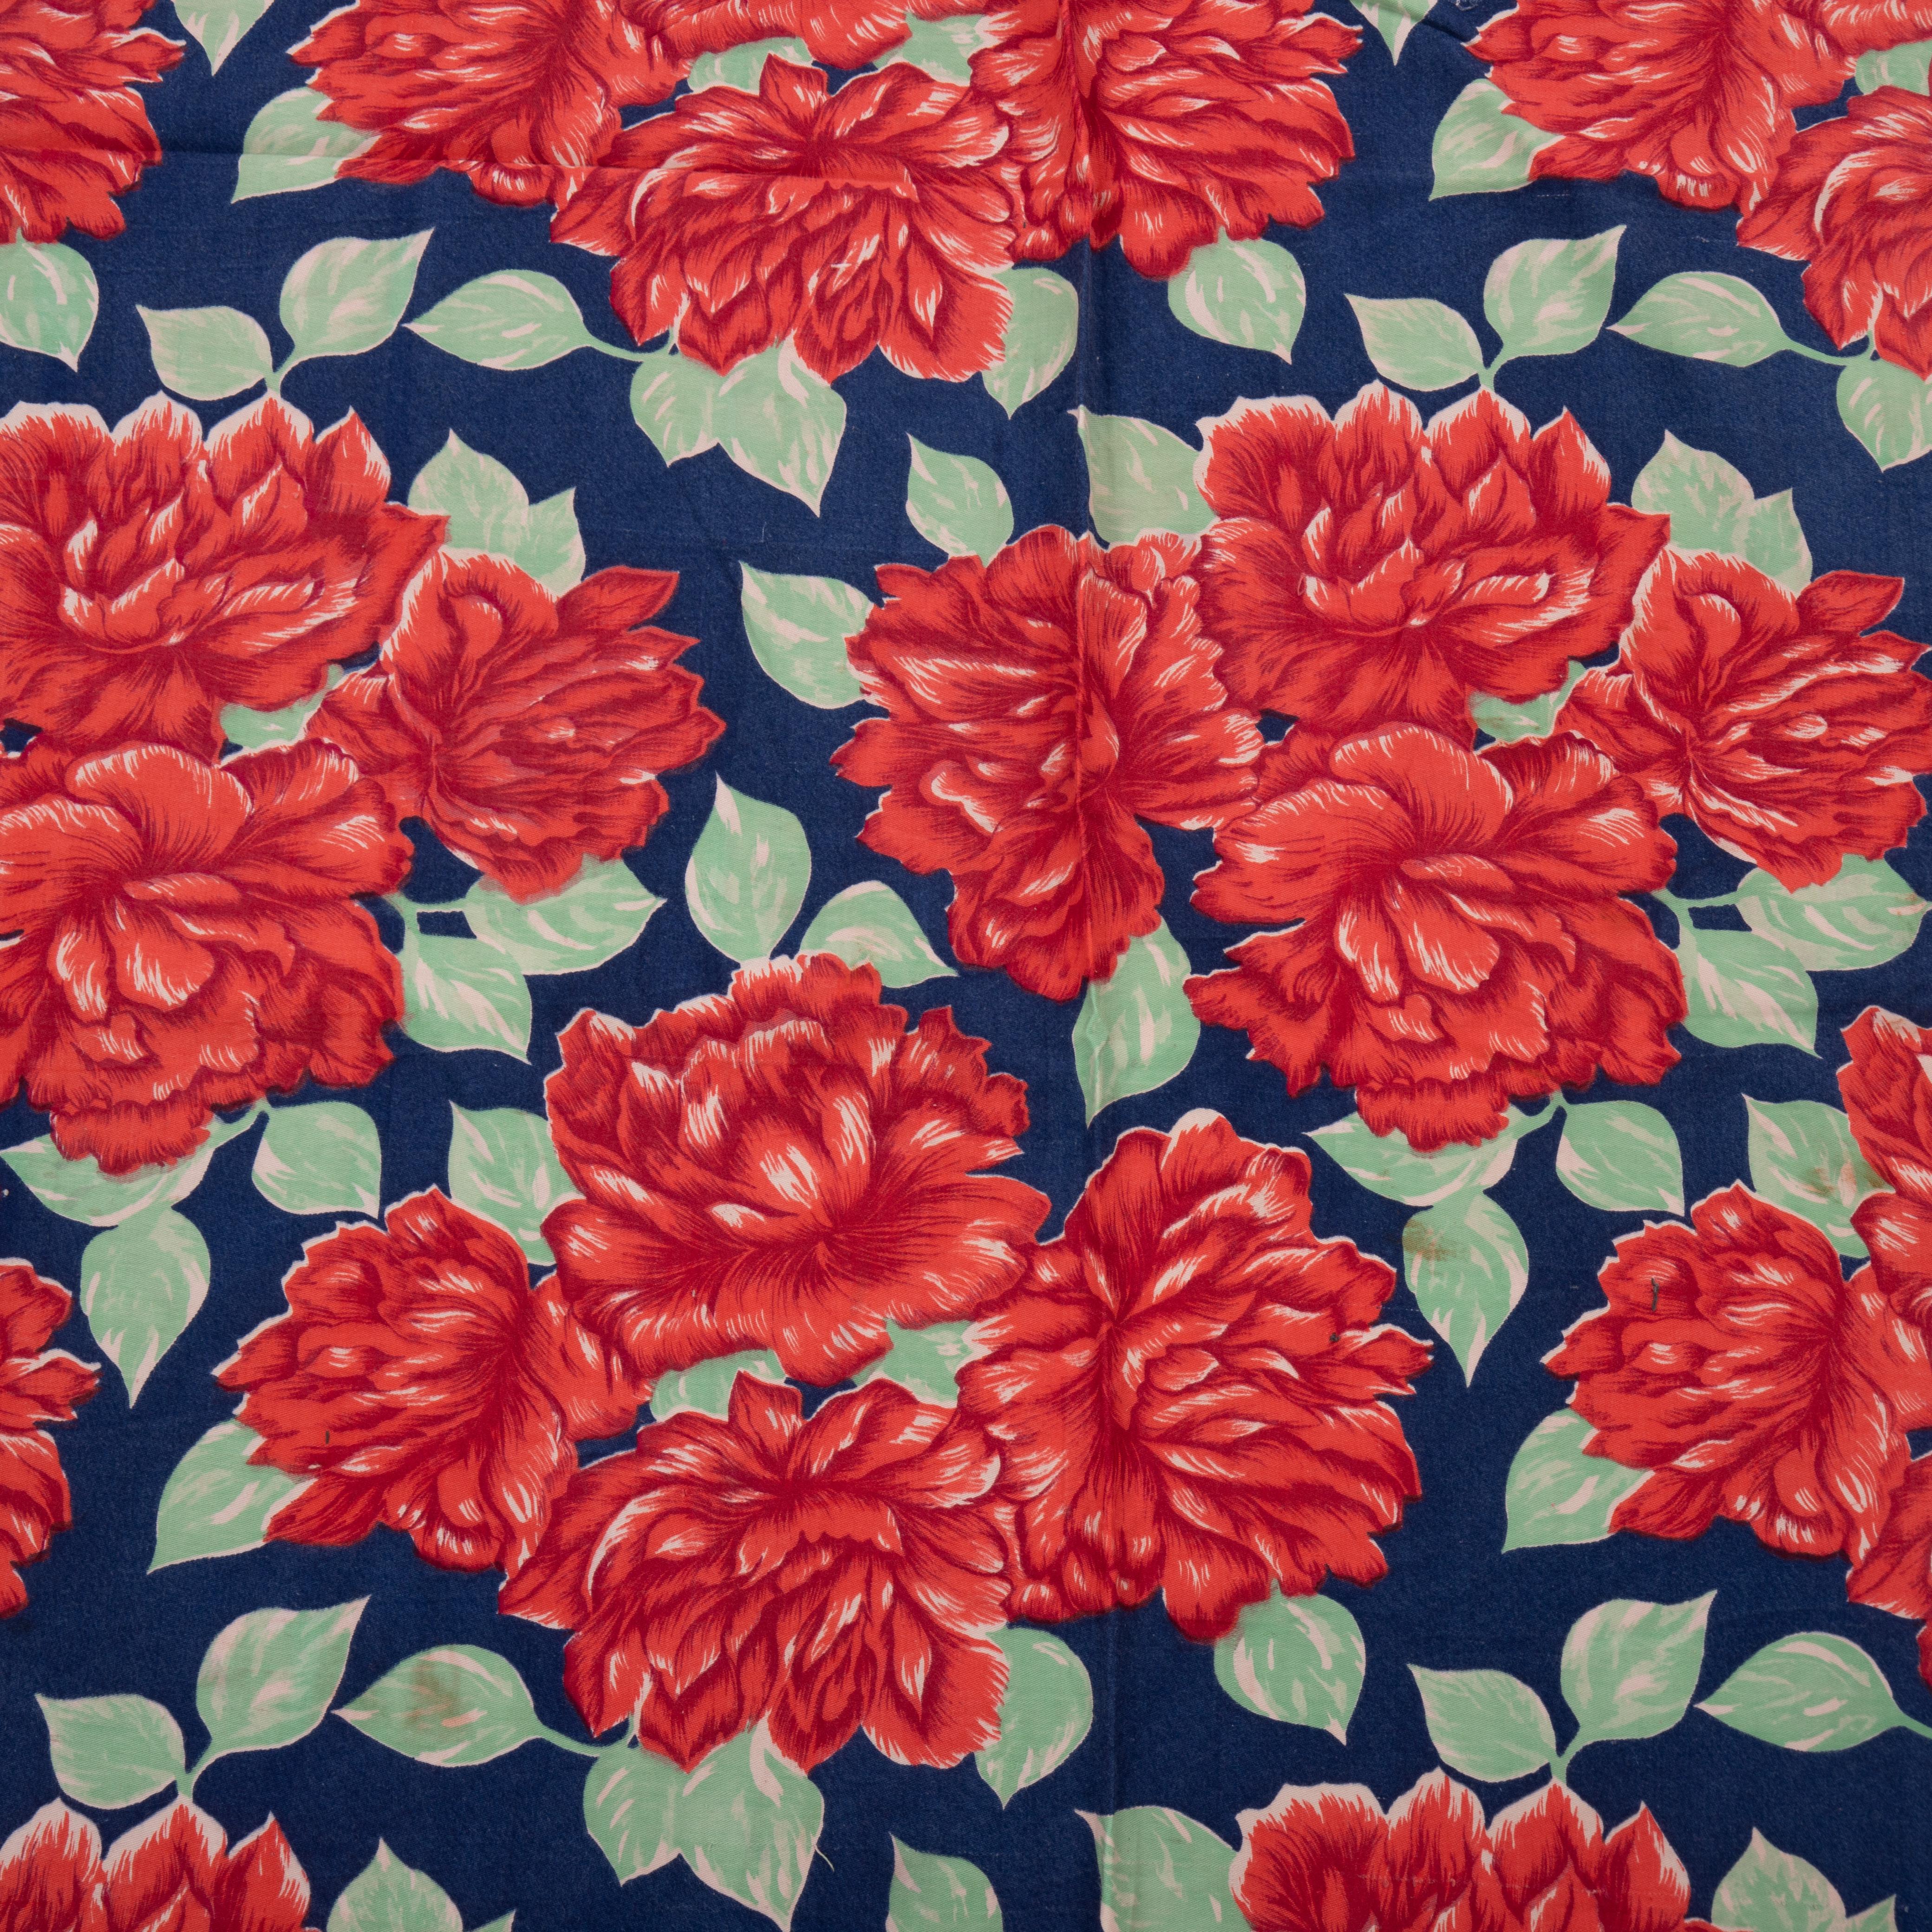 Russian Roller Printed Cotton Fabric Panel, Mid-20th Century or Earlier For Sale 1